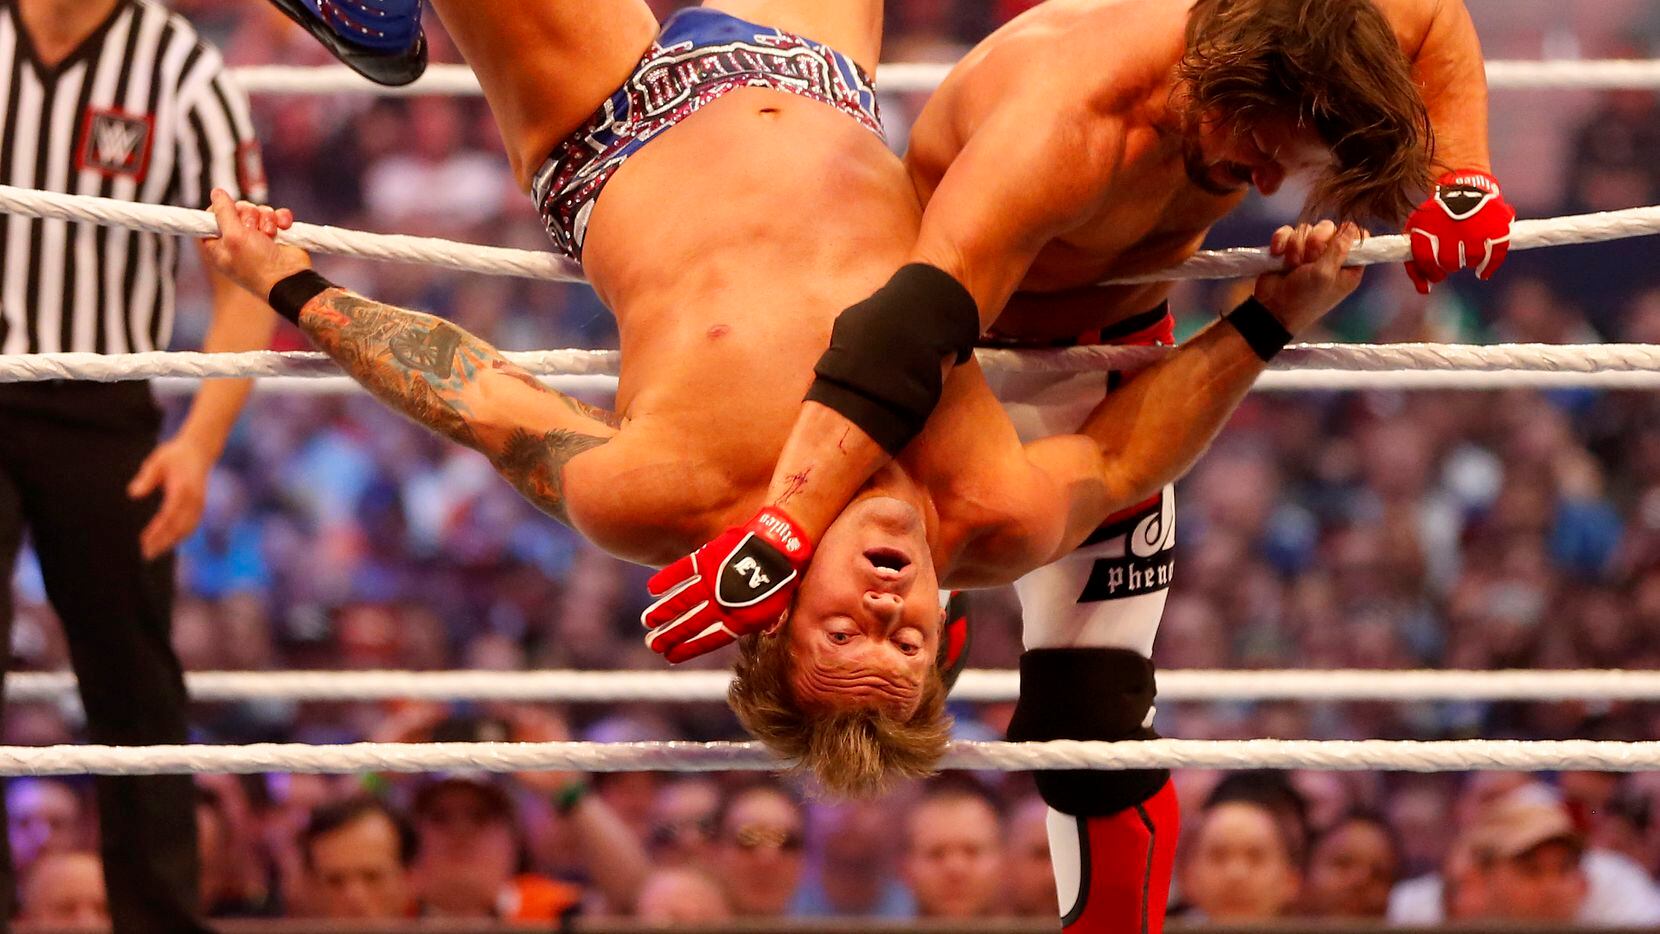 AJ Styles (right) wrestles with Chris Jericho during WrestleMania 32 at AT&T Stadium in Arlington in April.